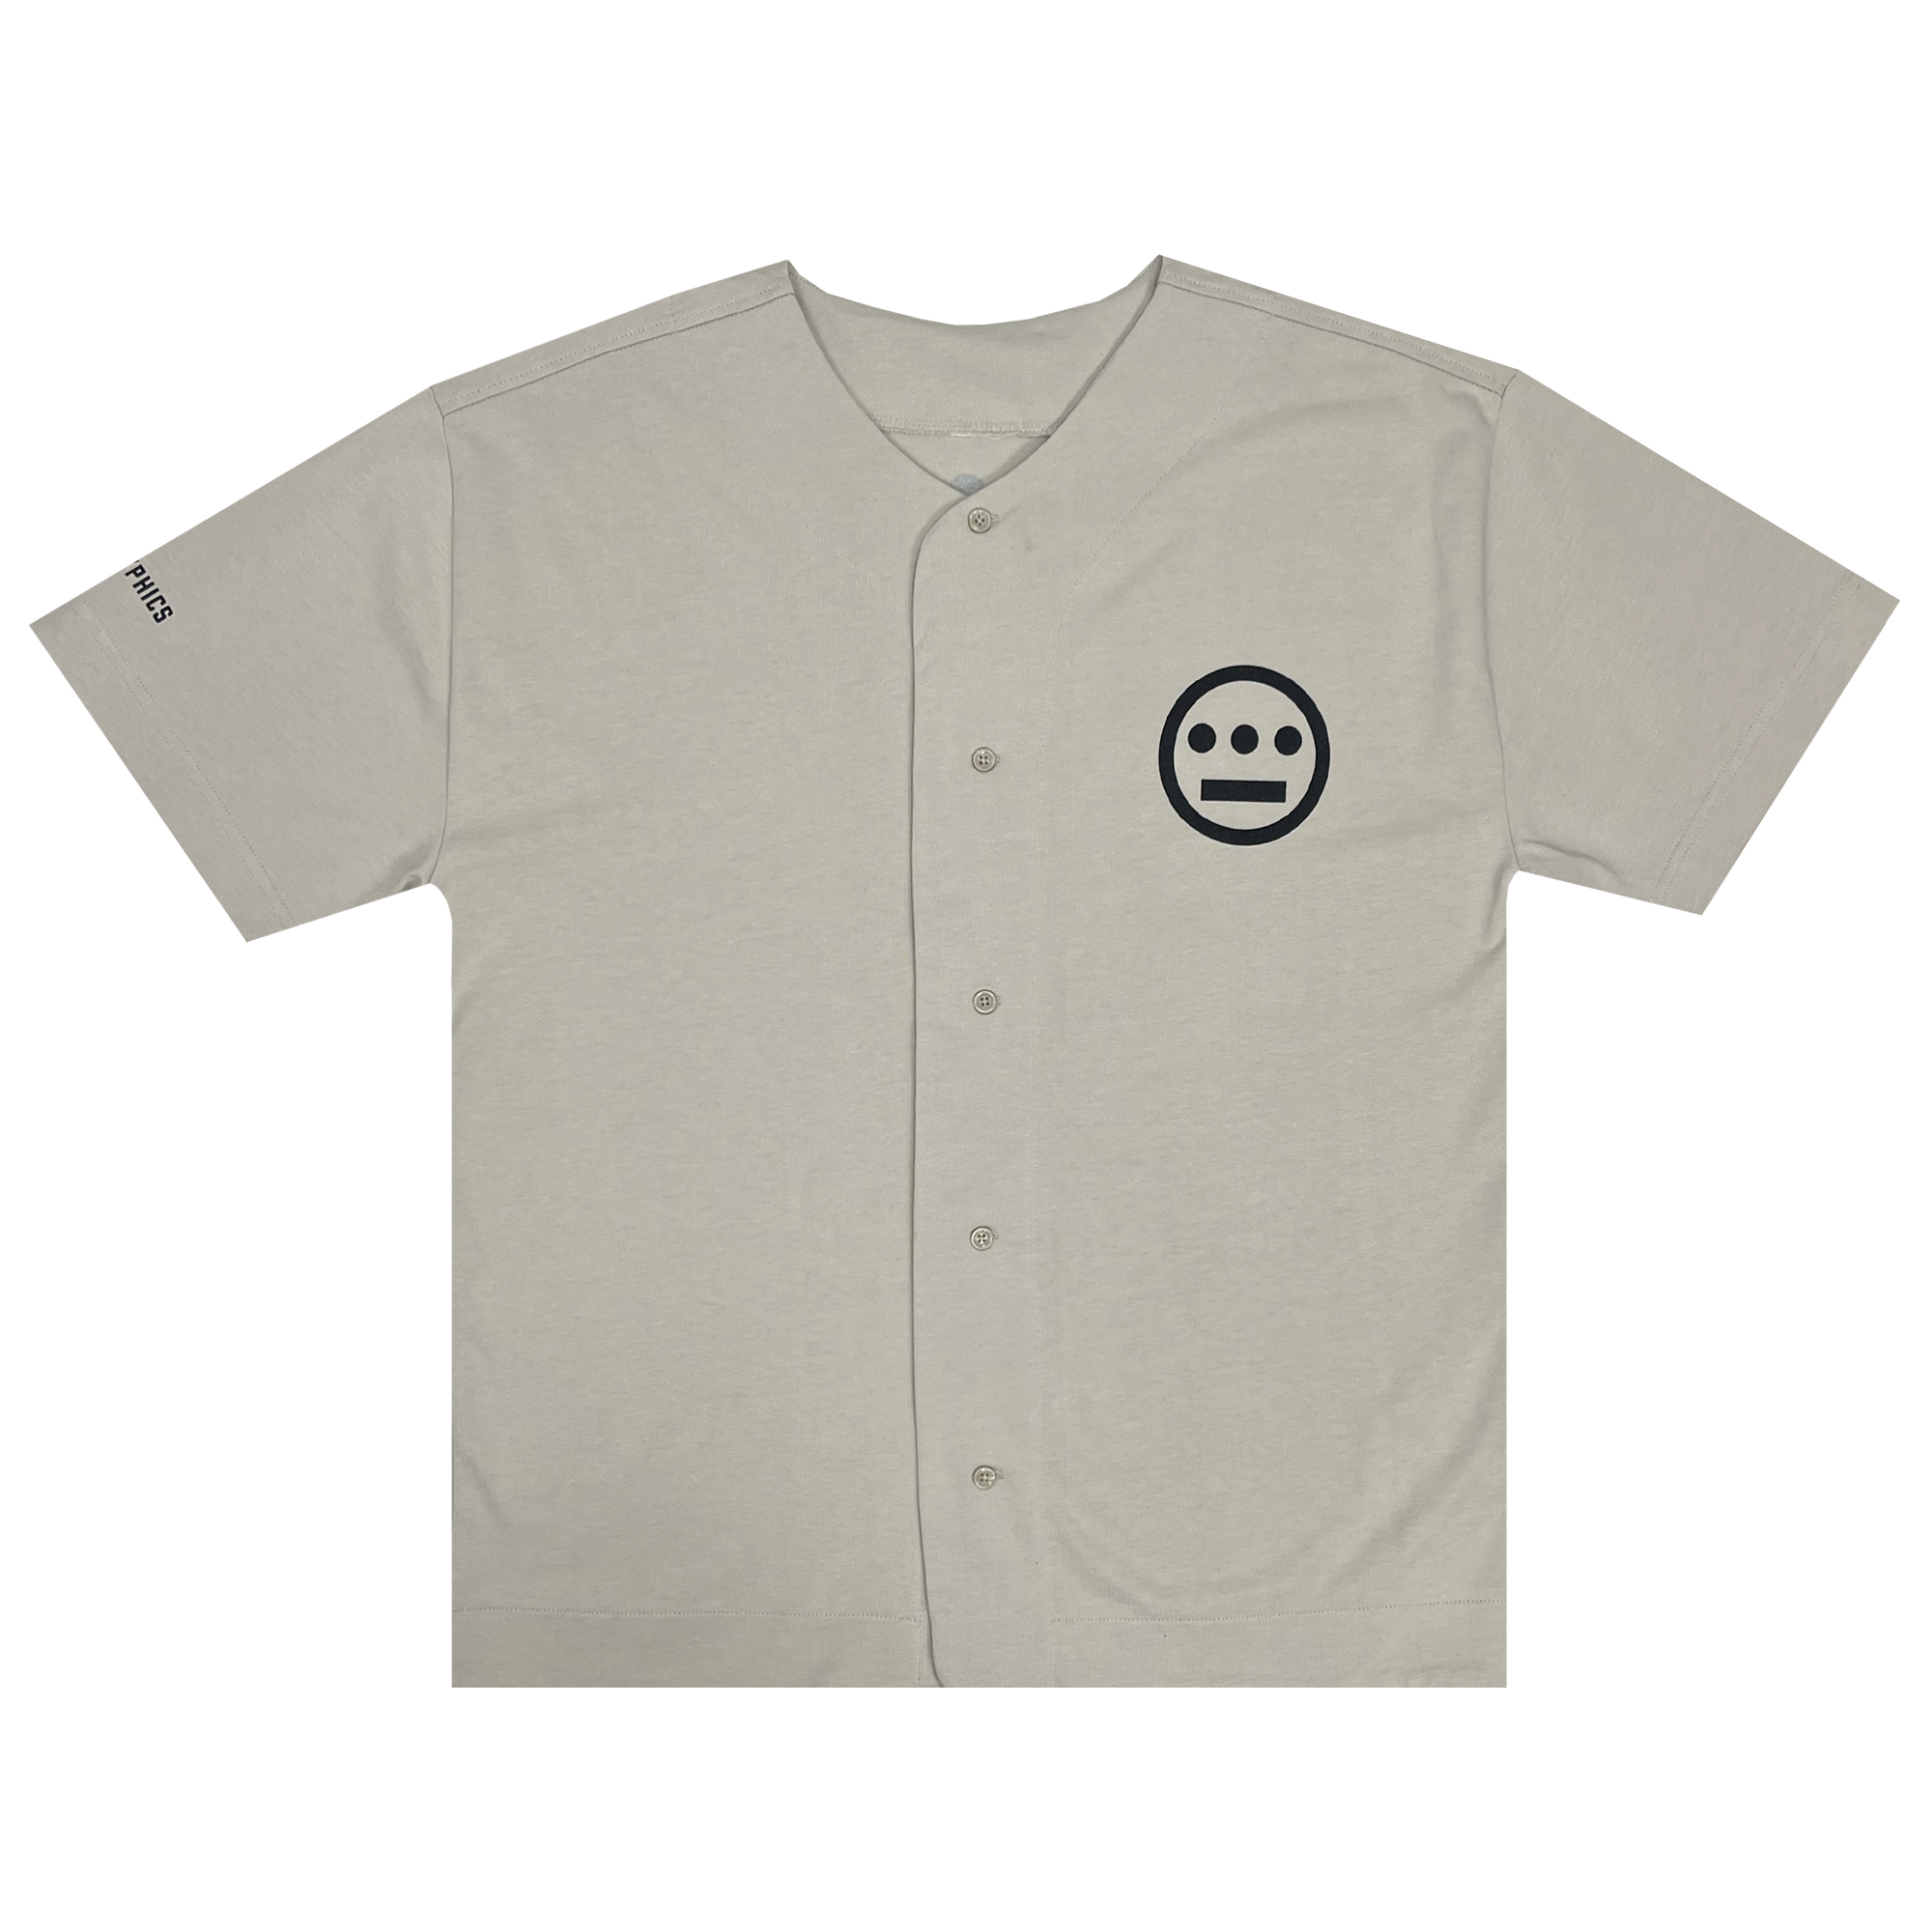 Bone-colored button-up baseball jersey with black Hieroglyphics Hip Hop logo on left chest.